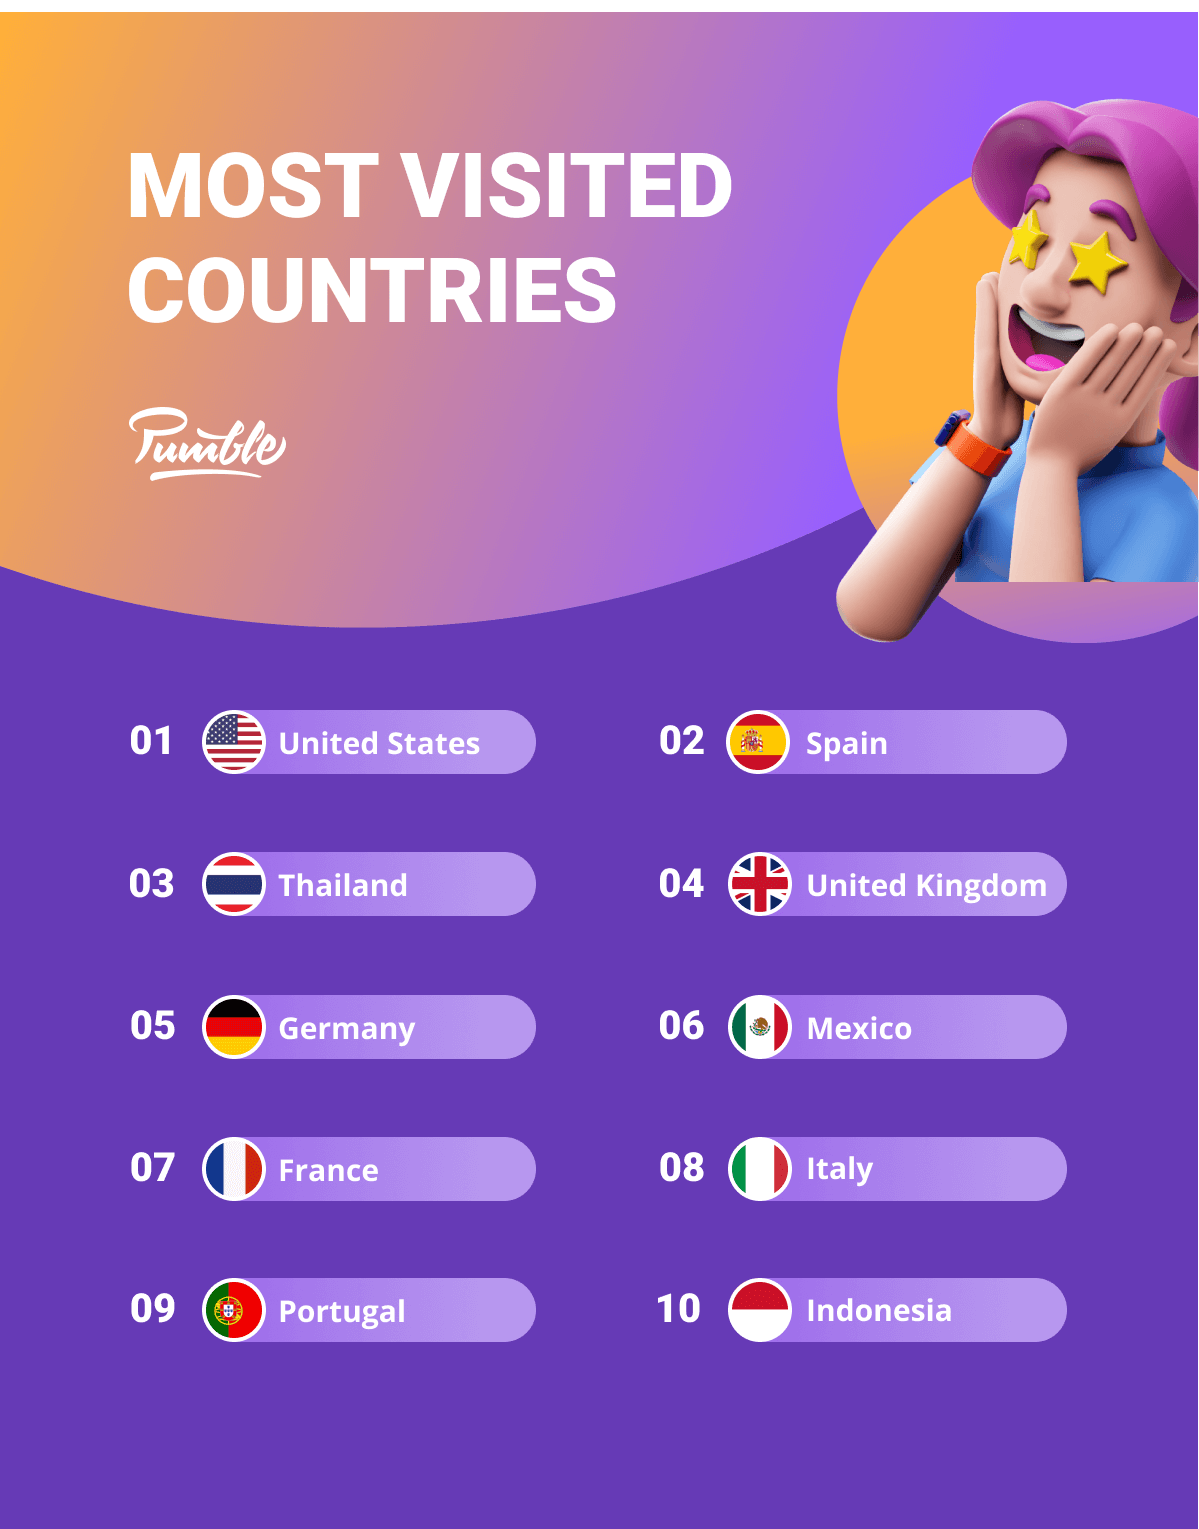 Most visited countries by digital nomads